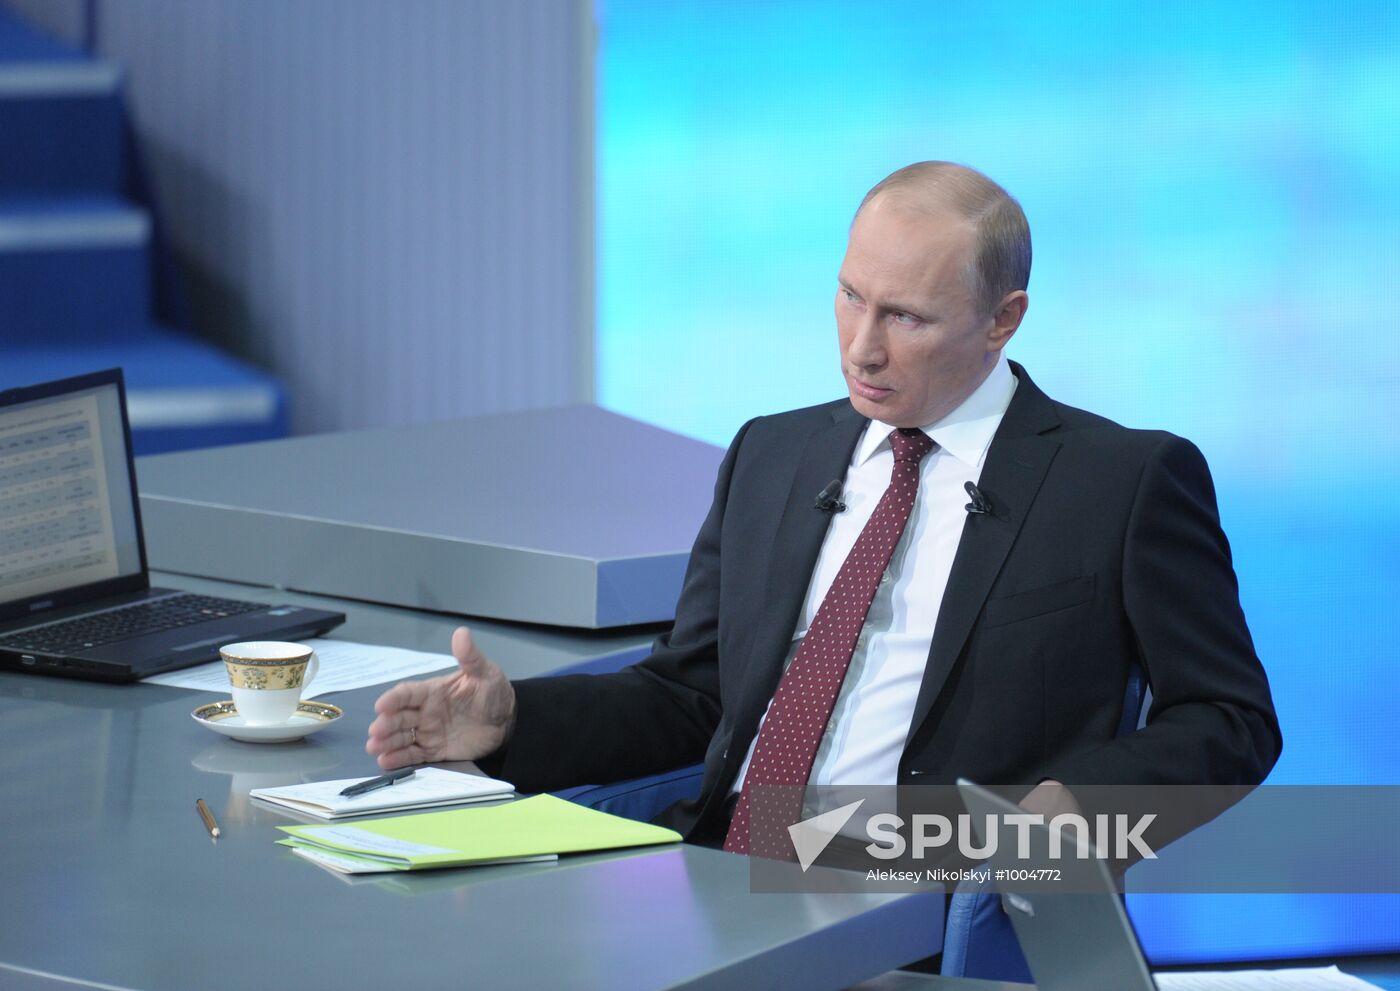 Q&A session 'A Conversation with Vladimir Putin: Continued'